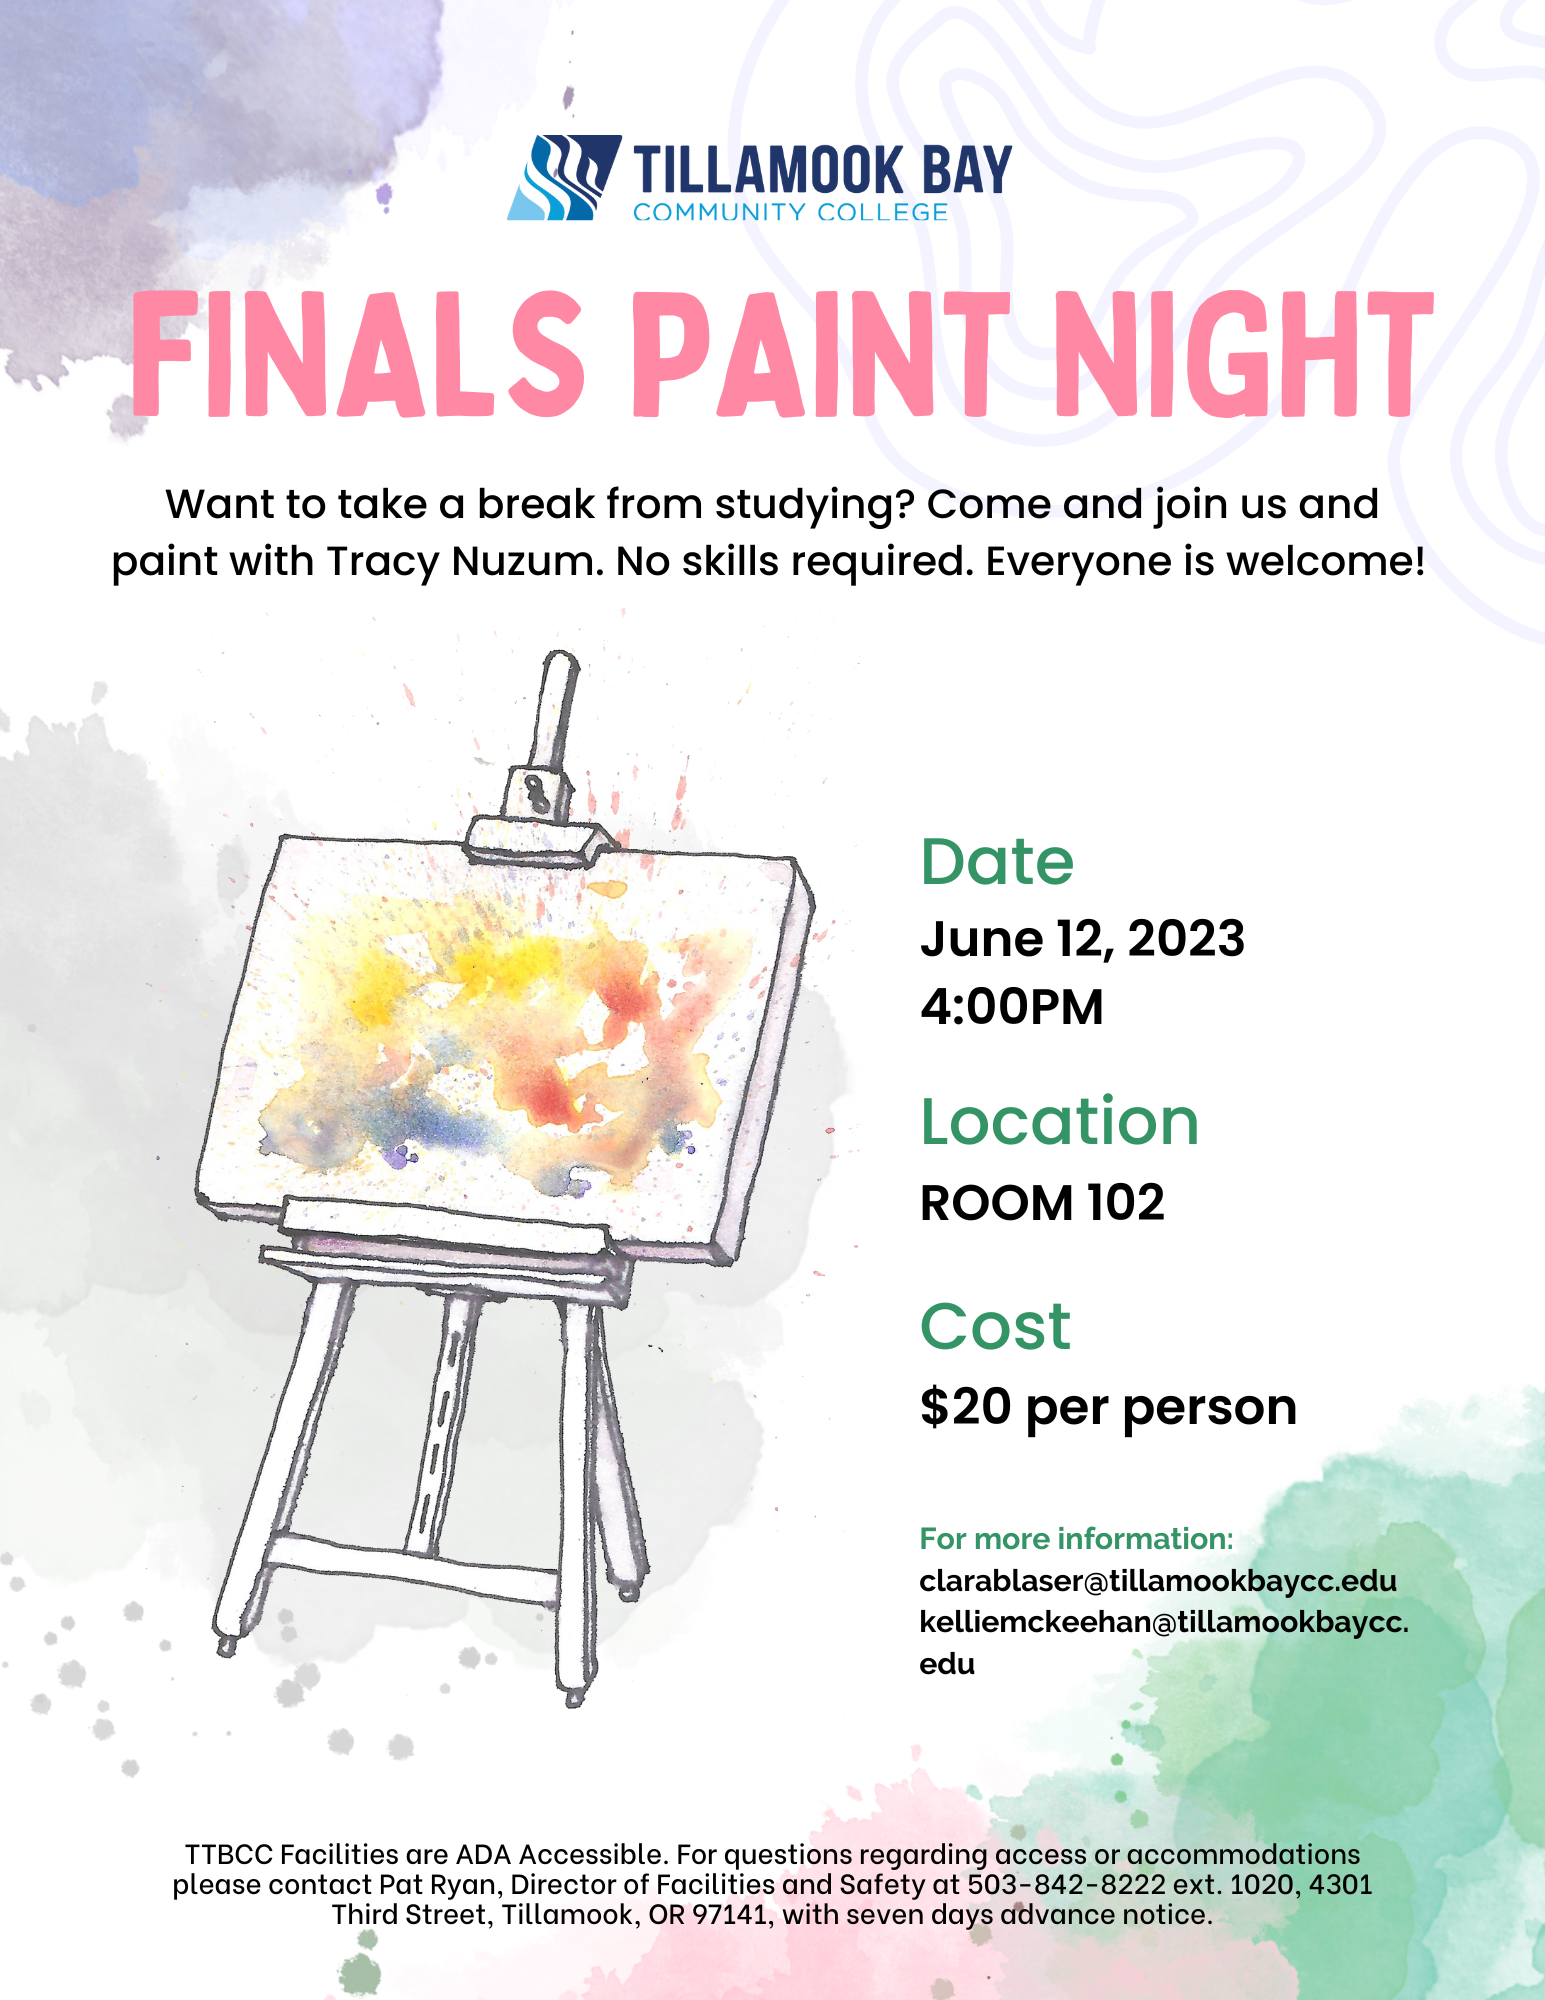 Finals Paint Night Flyer 1 xZ31LY.tmp